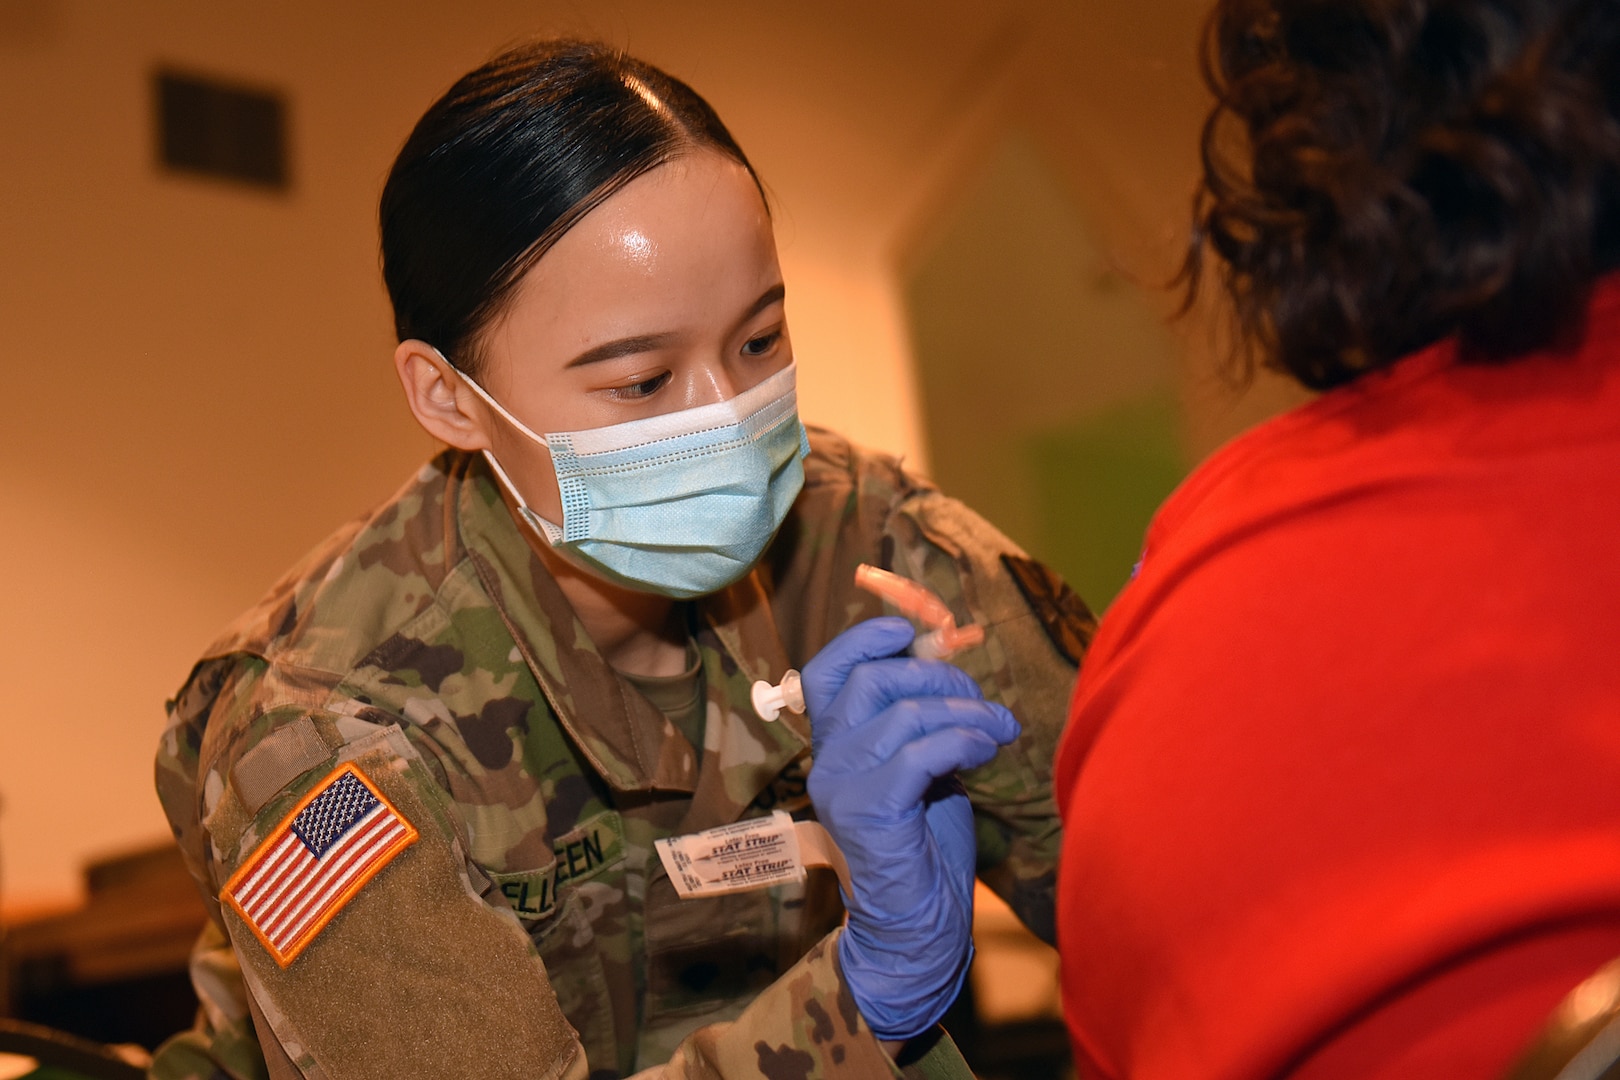 U.S. Army Spc. Melissa Bellgreen, a combat medic with the Michigan Army National Guard, assists the Genesee County Health Department at a vaccination clinic at a church in Flint, Michigan, April 9, 2021. Bellgreen came to the United States from China when she was a 1-year-old and became a U.S. citizen at the age of 8.